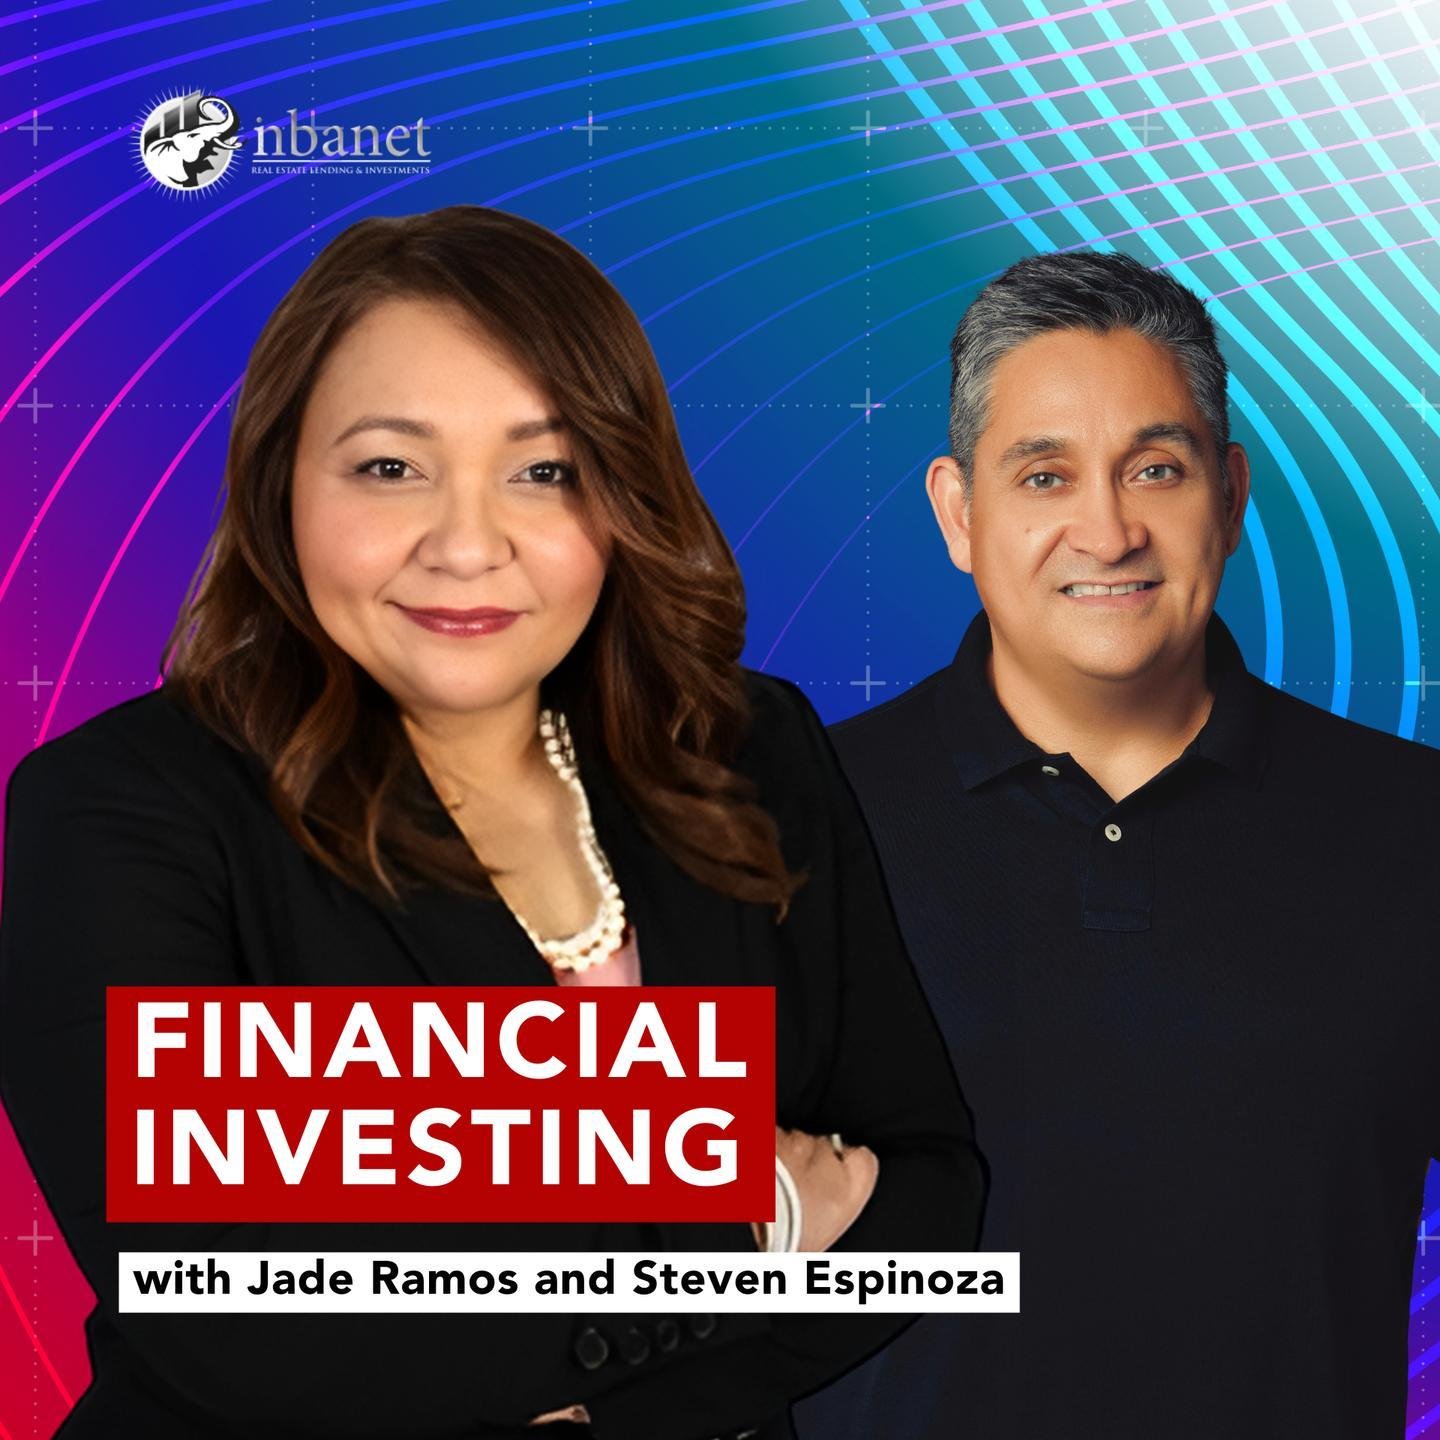 Thu May 23rd 11:00am - 12:00pm
KW Pasadena Cafe, 199 S Los Robles Ave #130, Pasadena, CA 91101 
Financial Investing Workshop
RSVP today.
Investment Bankers Network
About Jade Ramos
Jade Ramos is the Business Development Manager of Investment Bankers 